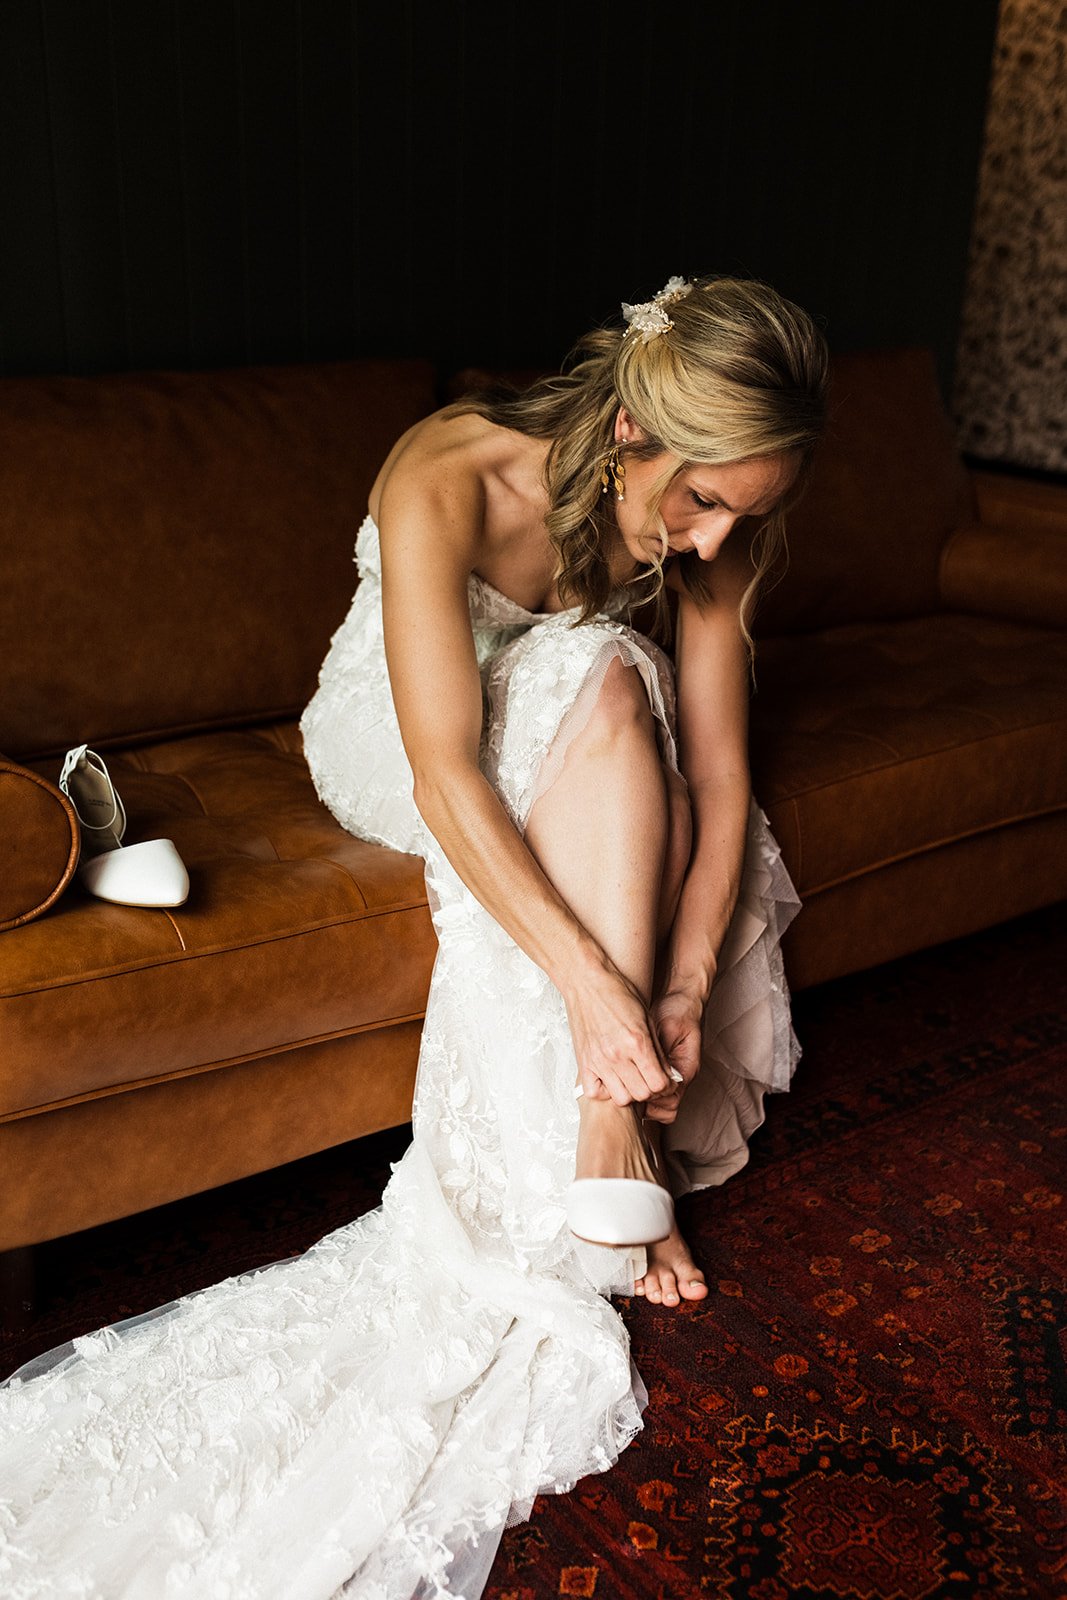  Photograph of a bride wearing the Made With Love Penny wedding dress sitting on a leather tufted sofa. She is bending over to clasp the ankle strap on her white d'orsay heels. Her hair is in soft curls with two tendrils falling around her face. 